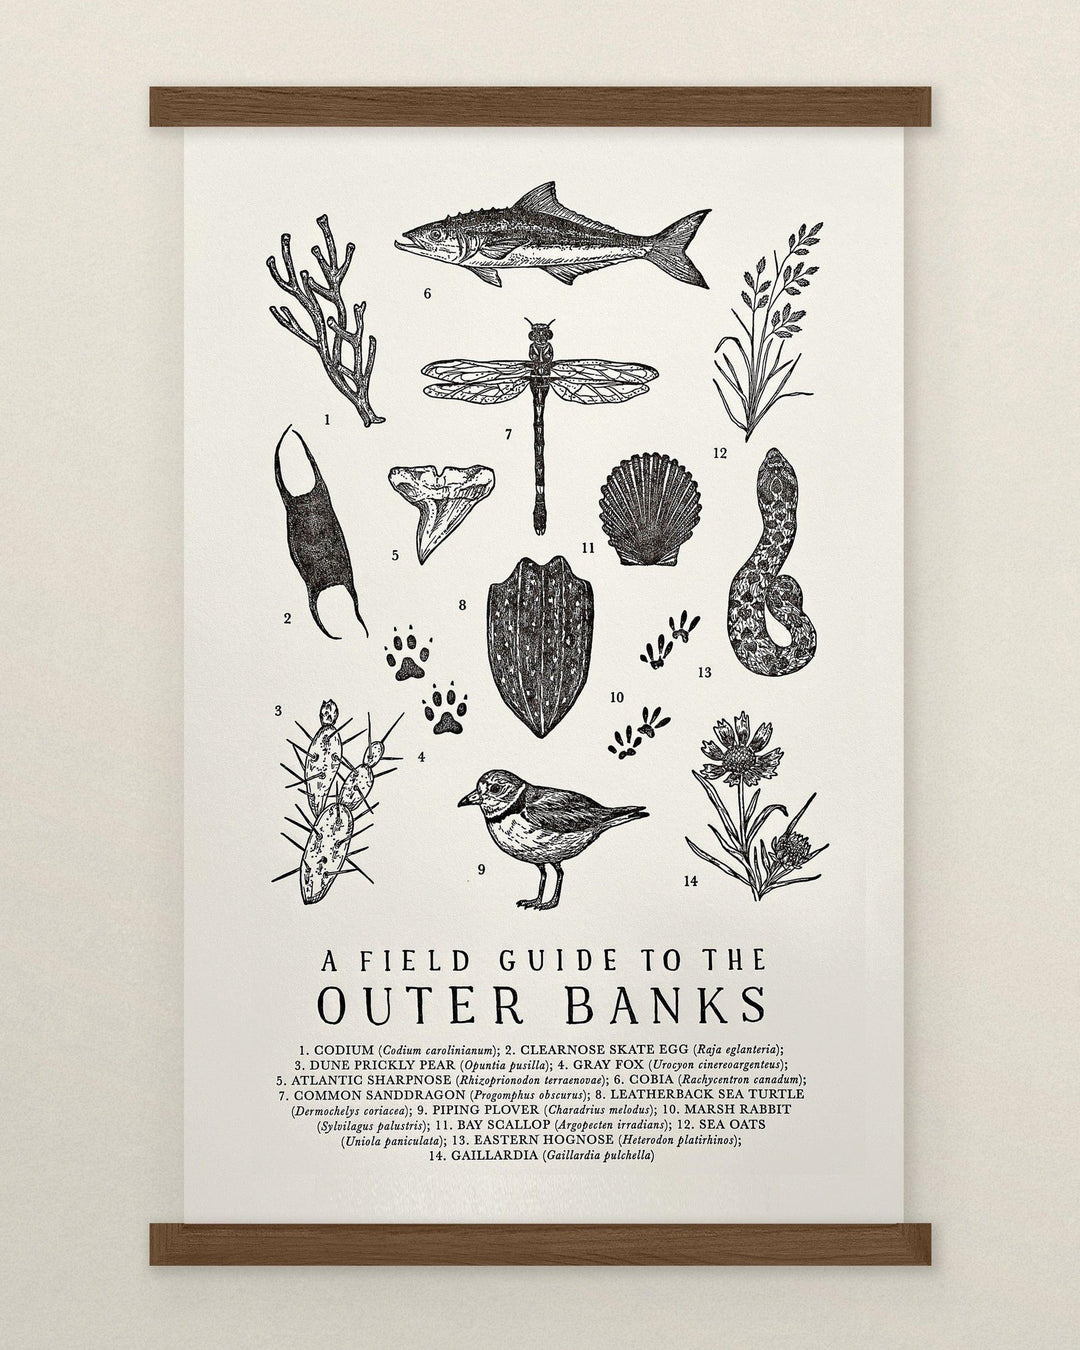 A Field Guide to the Outer Banks Print created by The Wild Wander, that says "a guide to the outer banks".